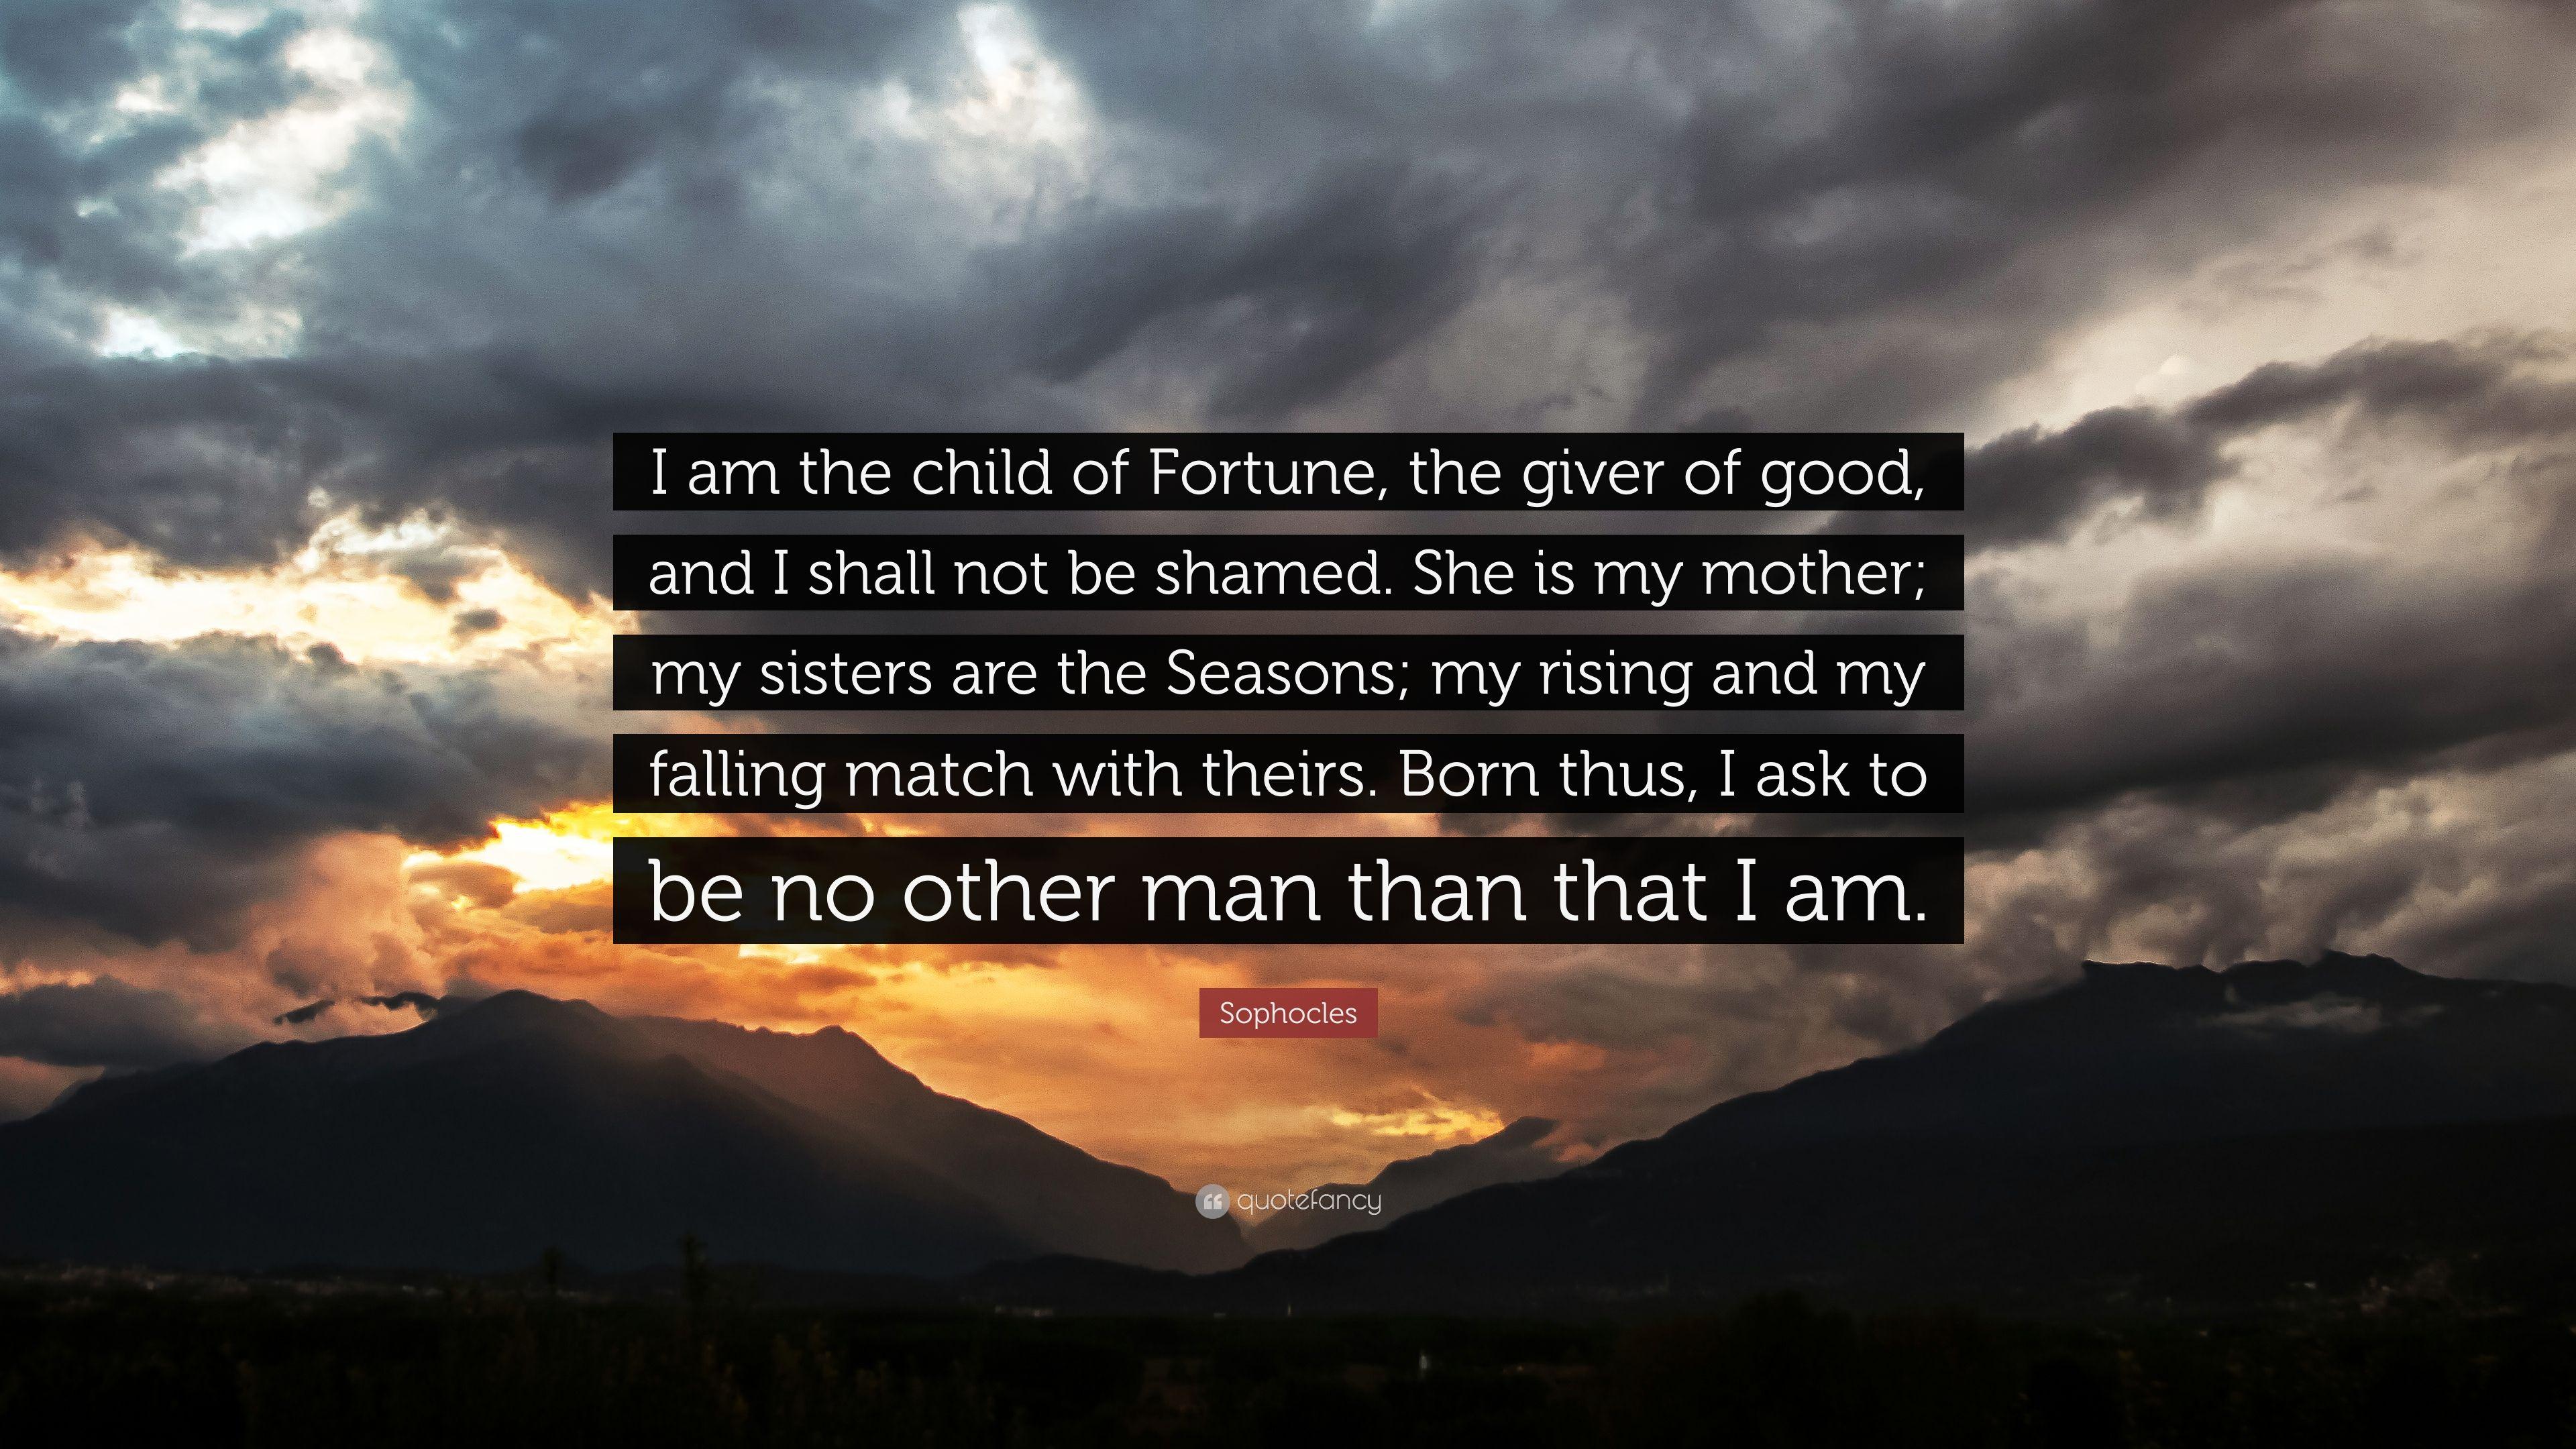 Sophocles Quote: “I am the child of Fortune, the giver of good